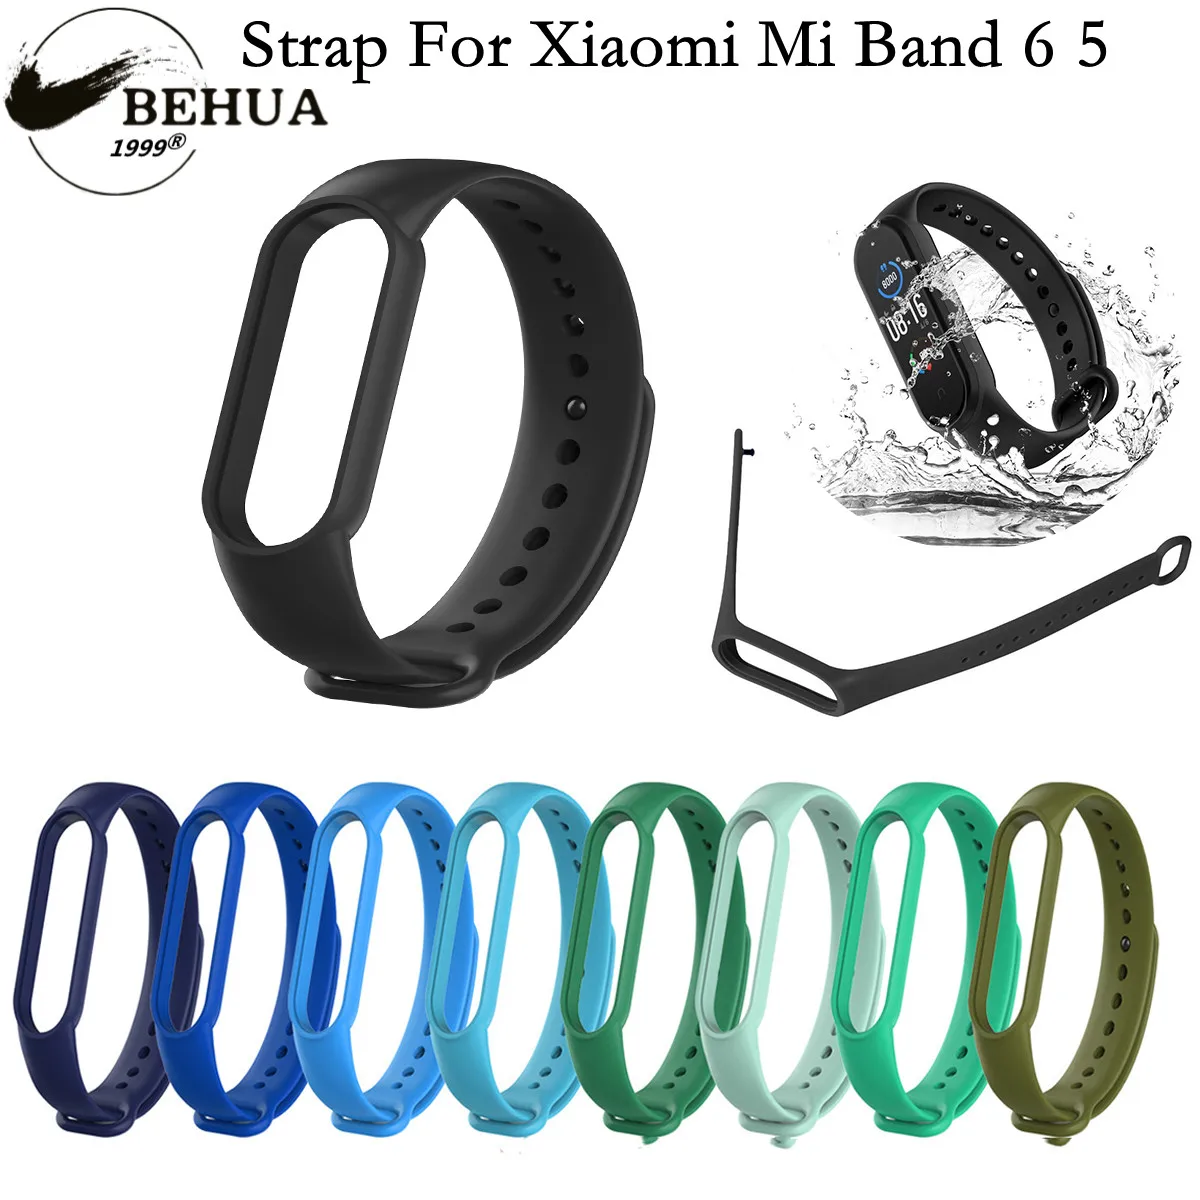 

Fashion soft Silicone wristband Replacement for Xiaomi Mi band 6 5 watch Strap Watchband Bracelet For Xiaomi Band 5 6 Accessorie